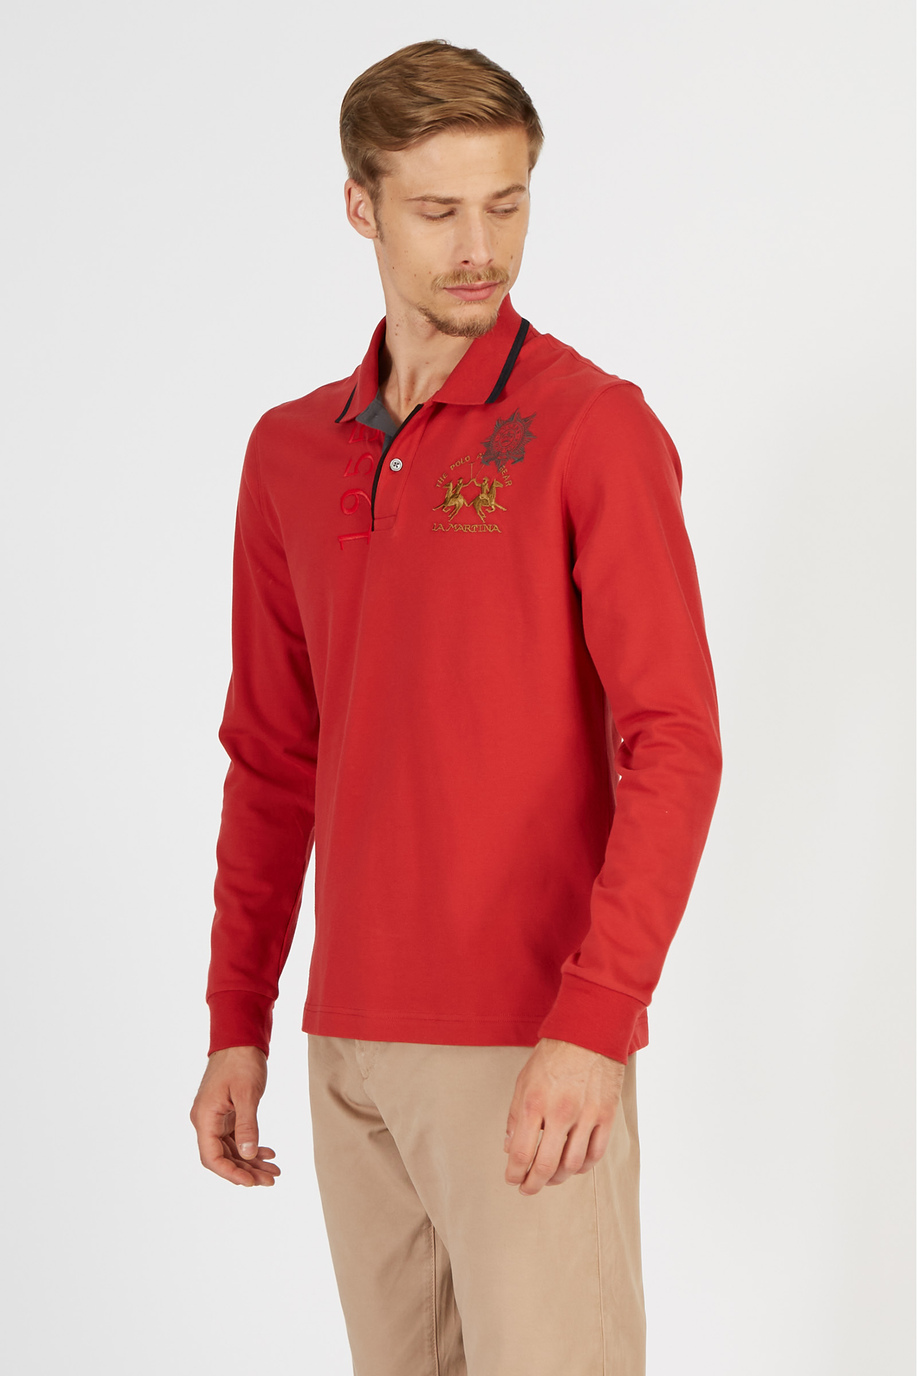 Men’s Polo Guards with long sleeves in regular fit stretch piqué cotton - Men | La Martina - Official Online Shop